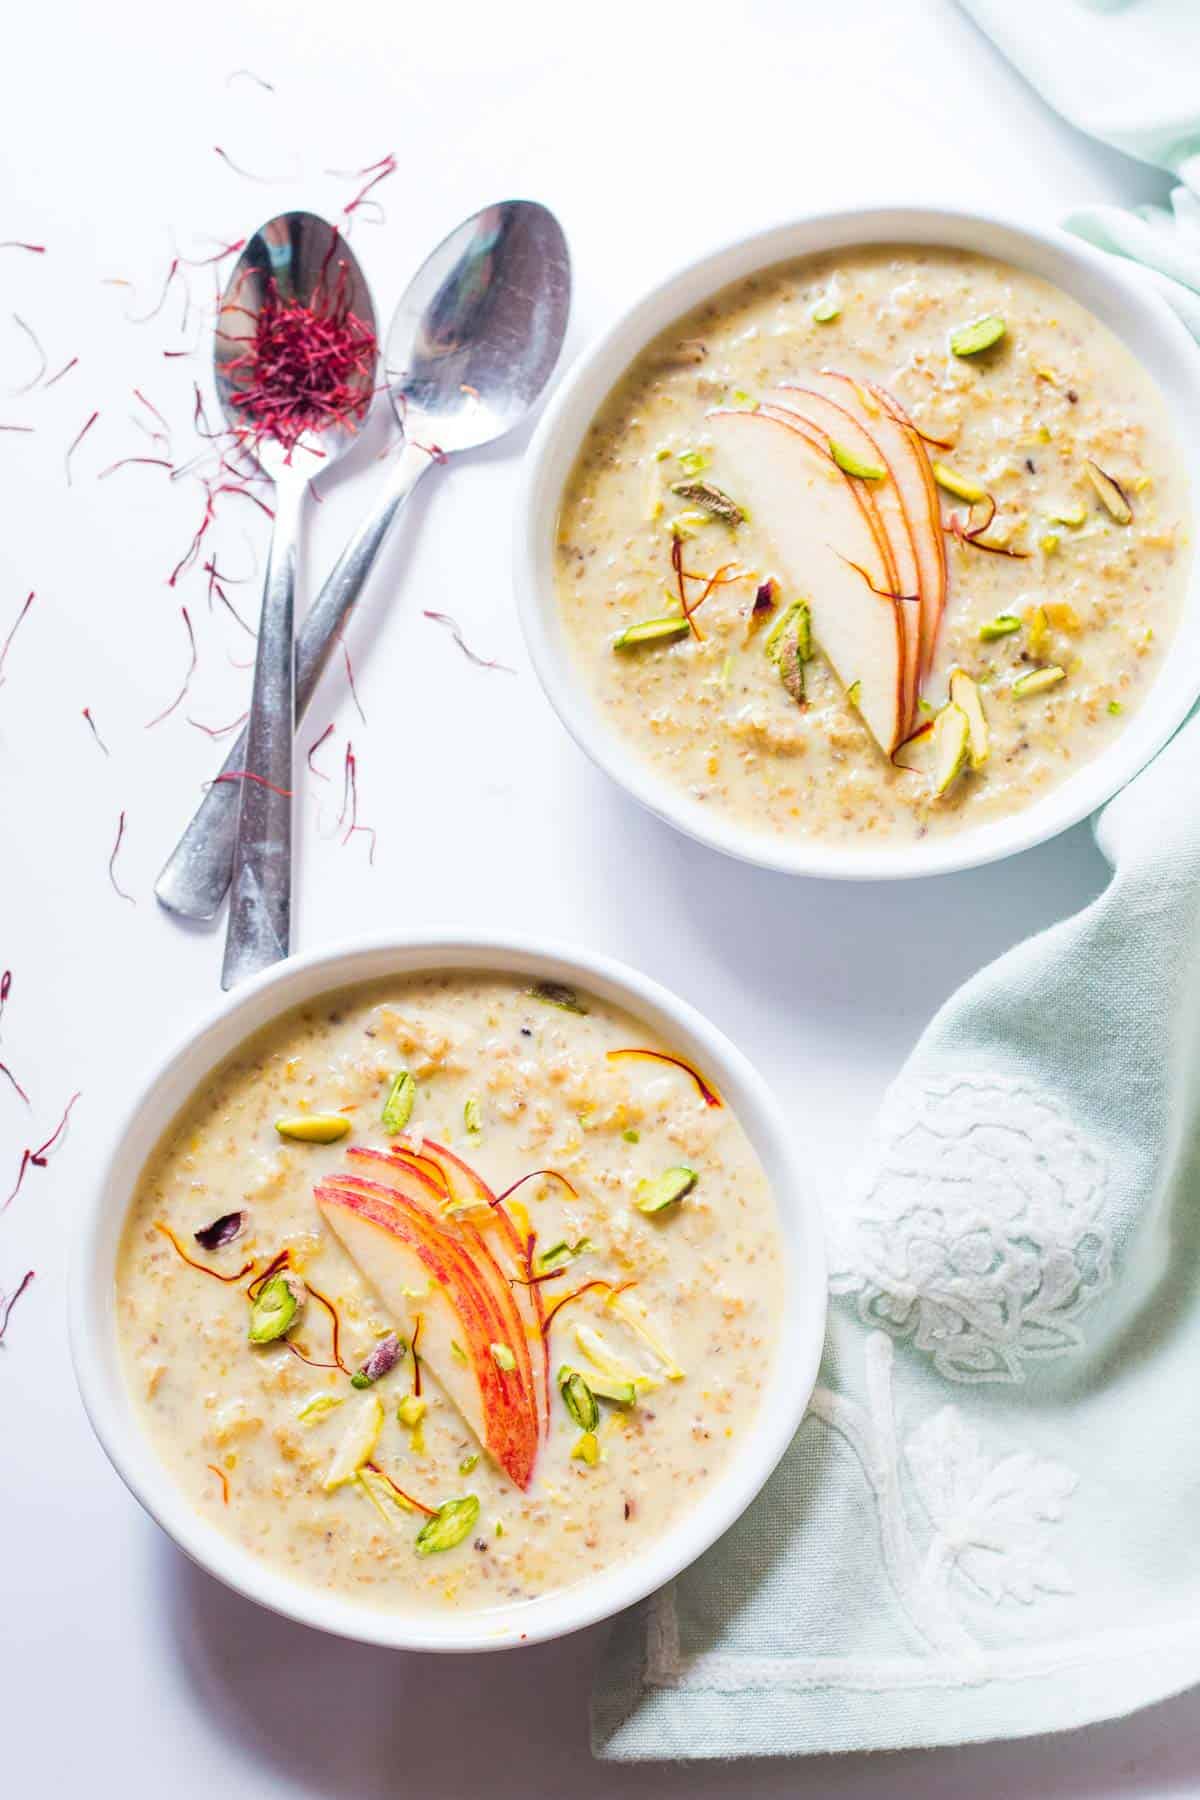 The Healthy Quinoa Apple Kheer served in white bowls.